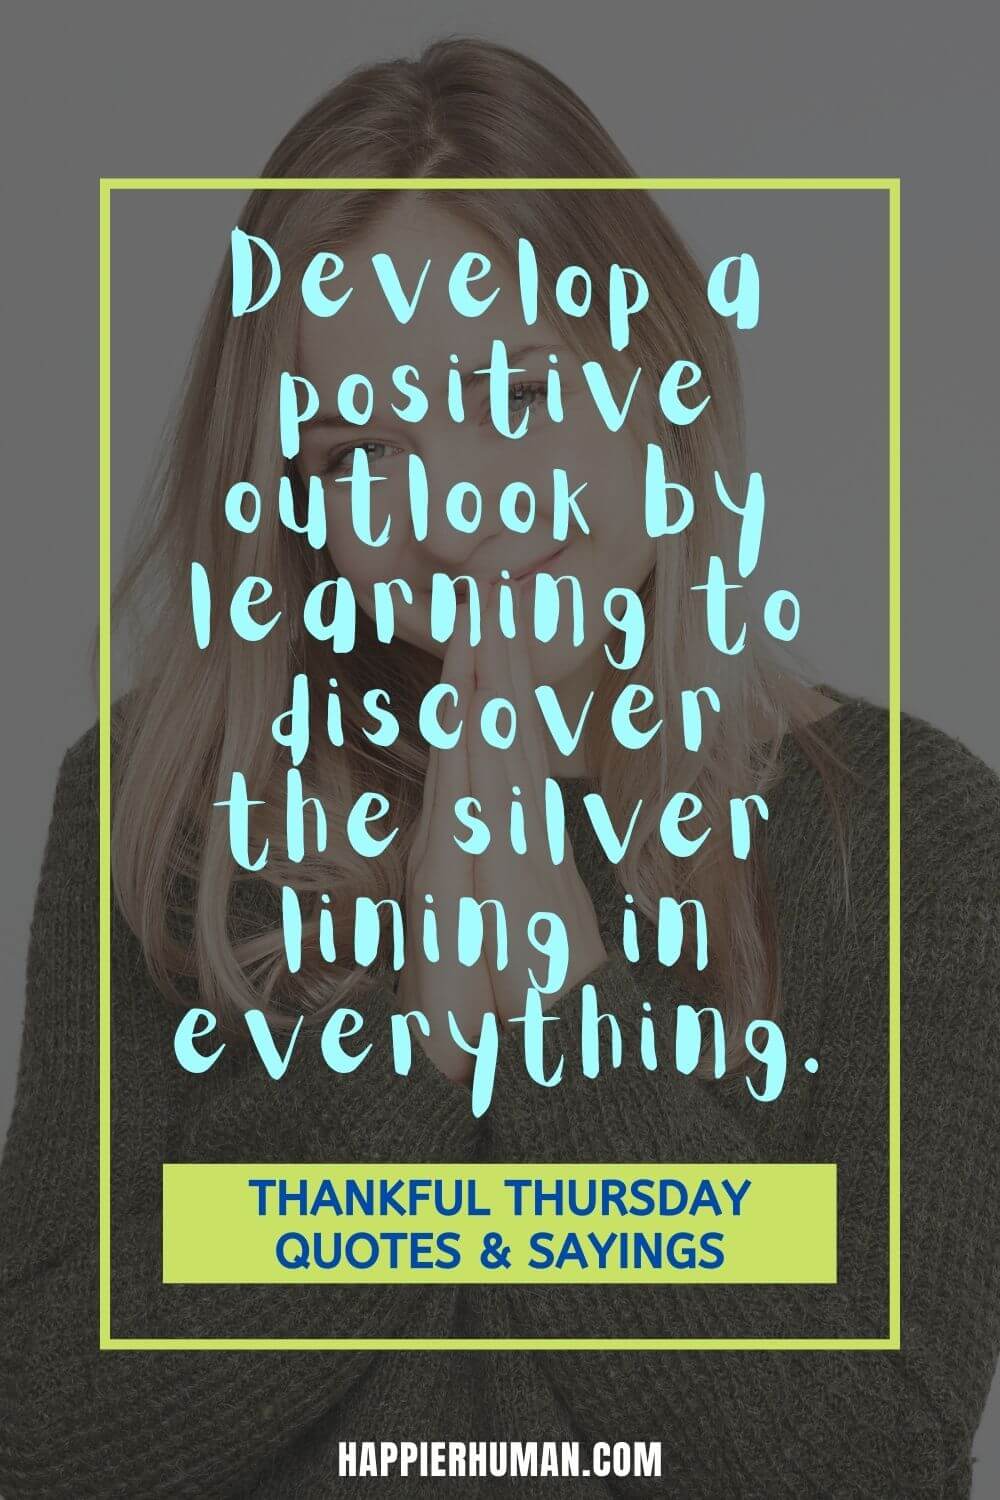 Thankful Thursday - Develop a positive outlook by learning to discover the silver lining in everything. | thankful thursday blessings | thankful thursday quotes | thankful thursday blessings